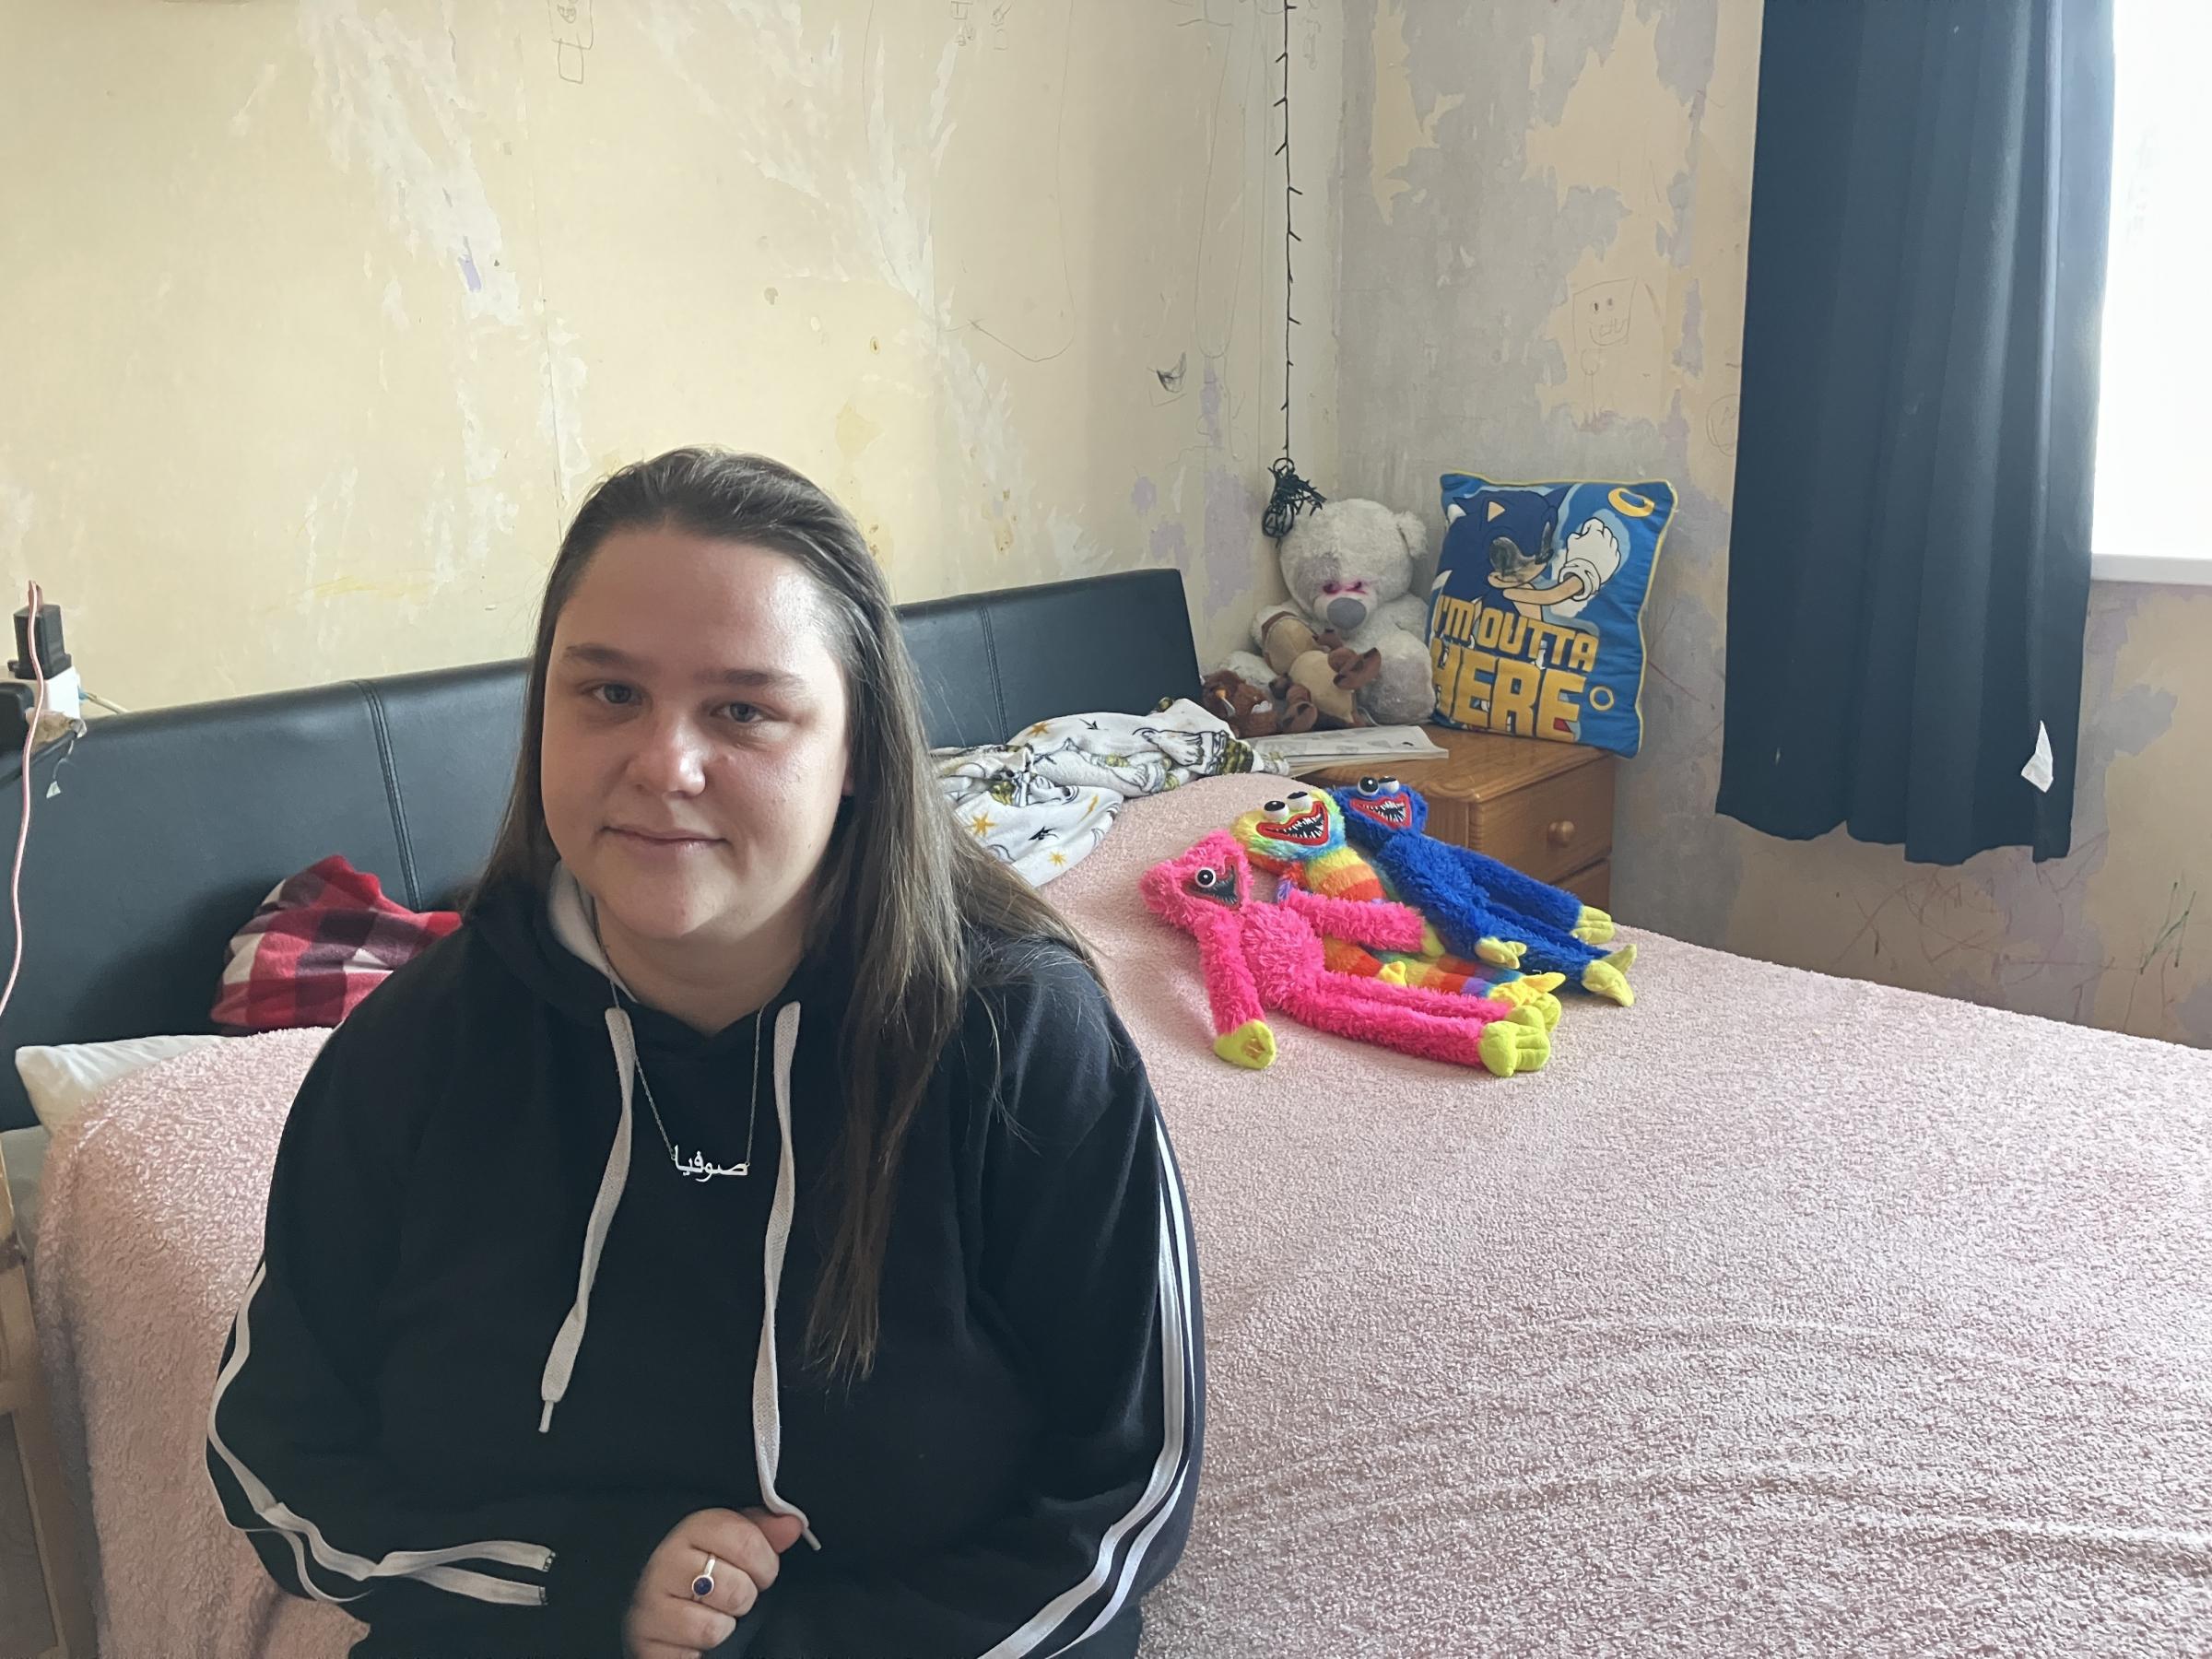 Bexley mum has shared bed with six-year-old son for nearly two years